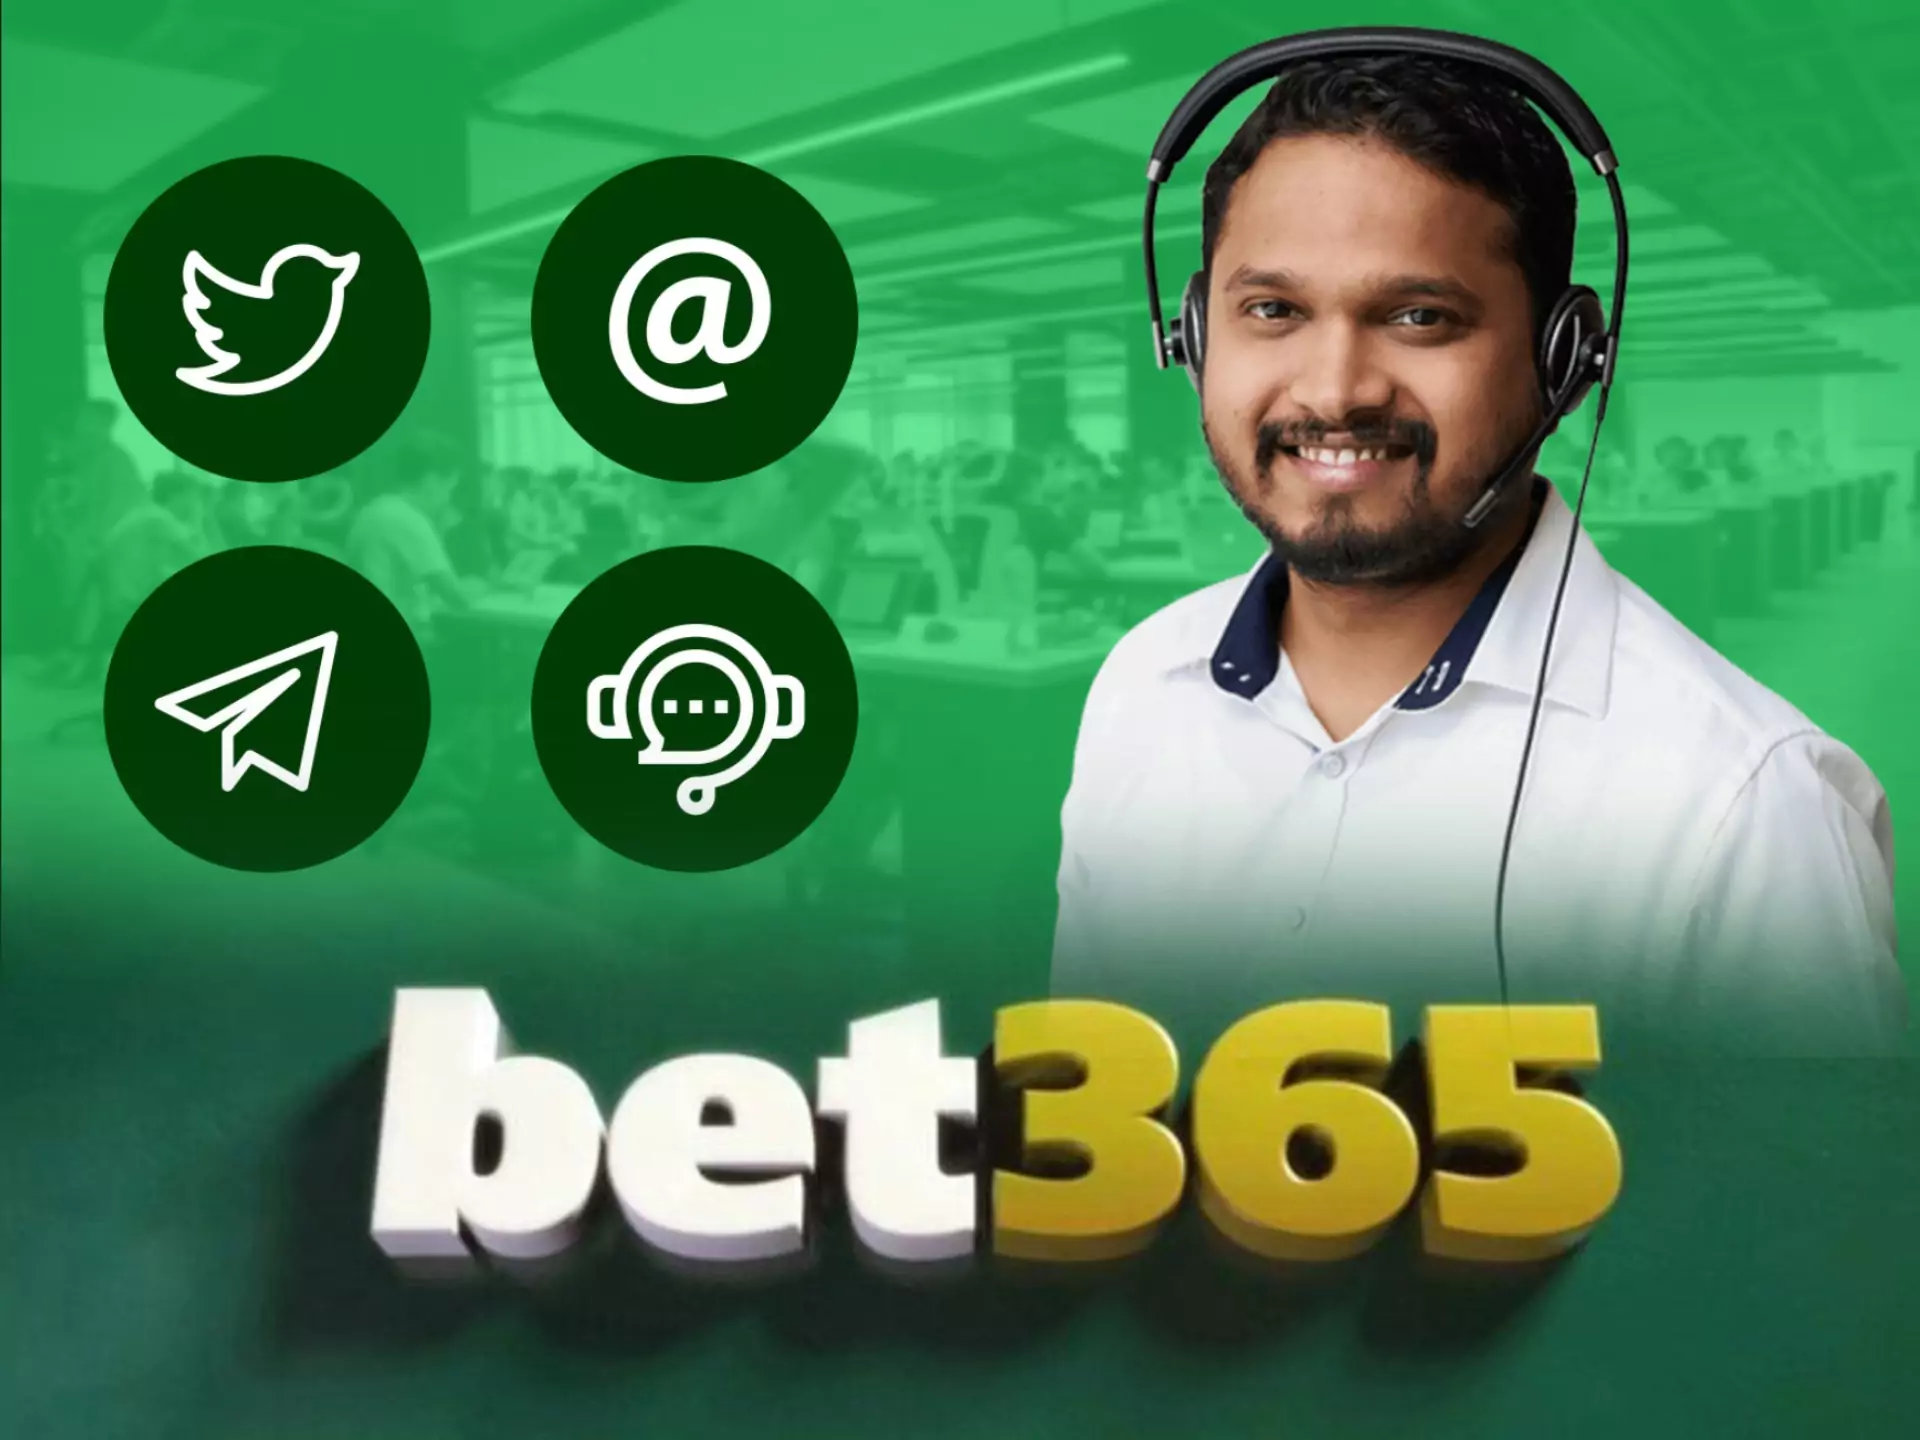 You can contact bet365 customer support to get some help if you need it.